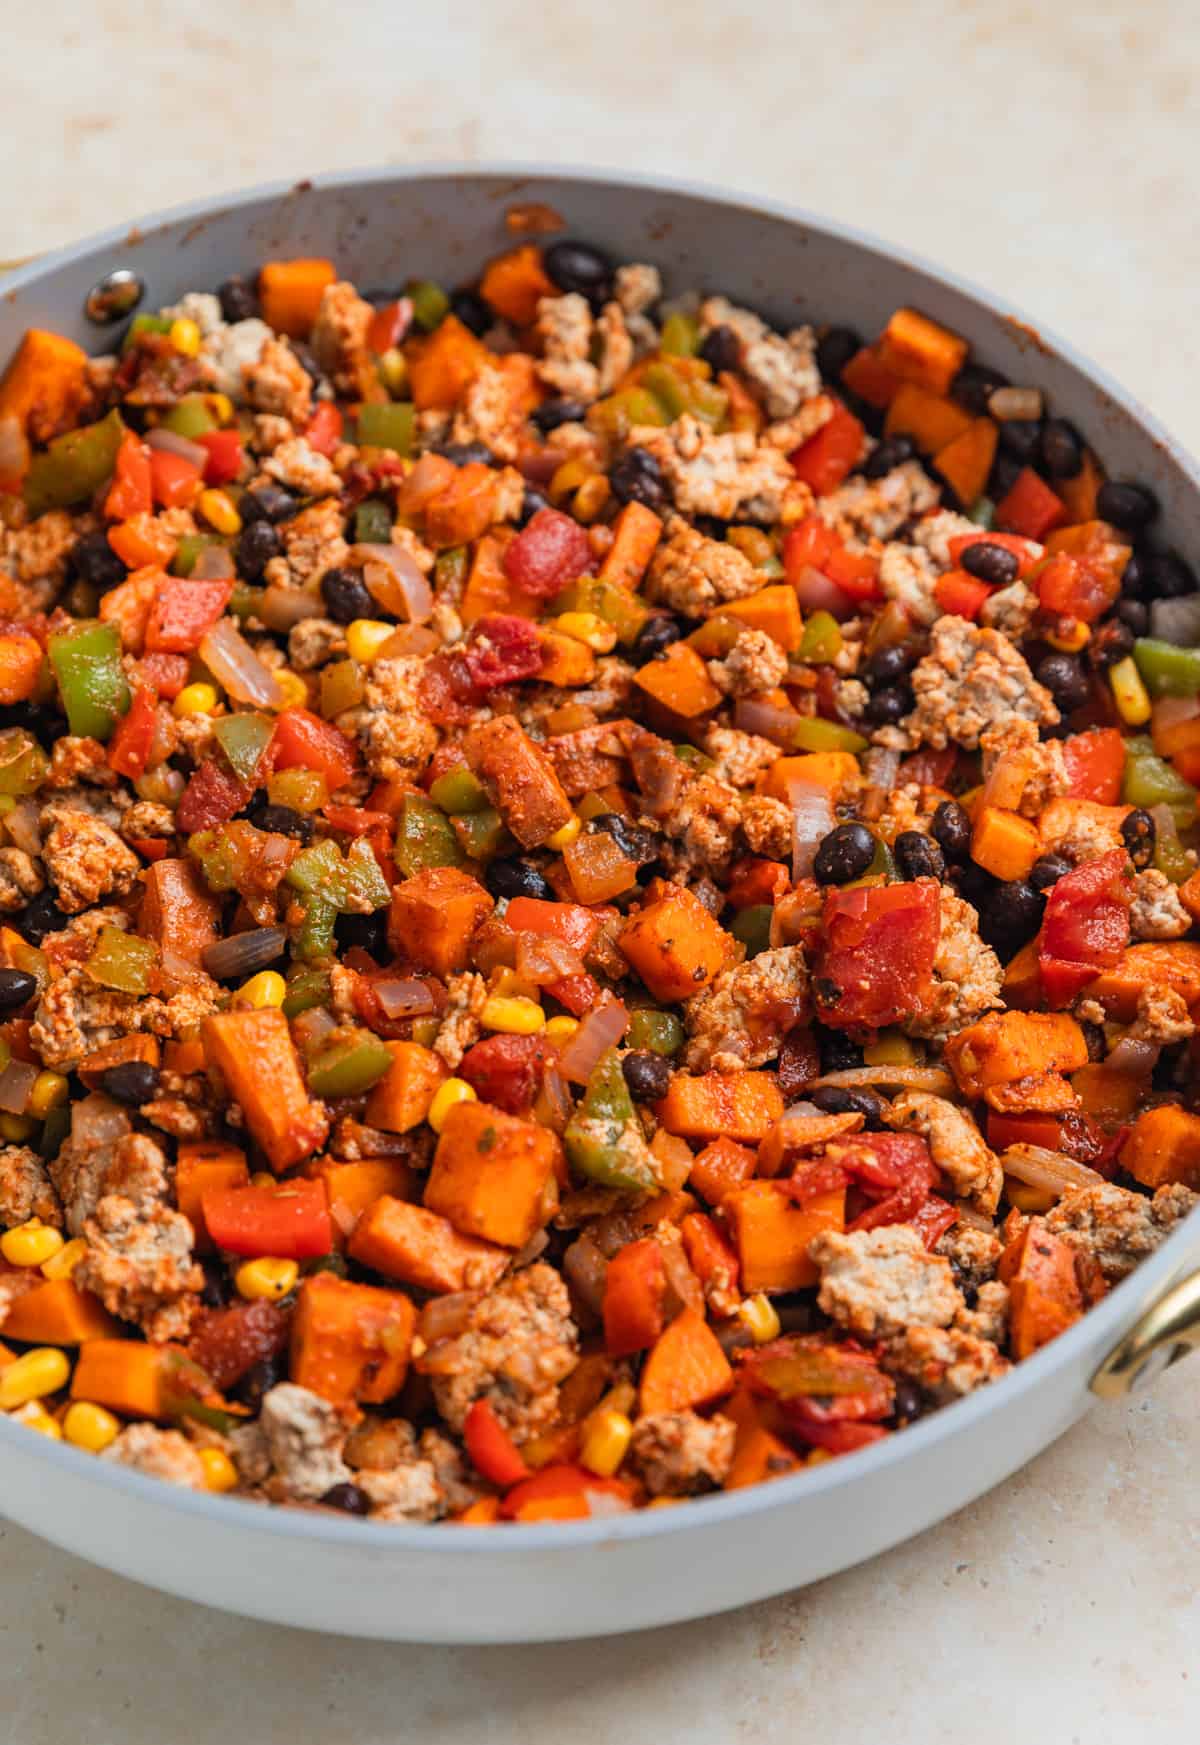 Turkey and pepper mixture stirred into sweet potato, bean, corn mixture in skillet.